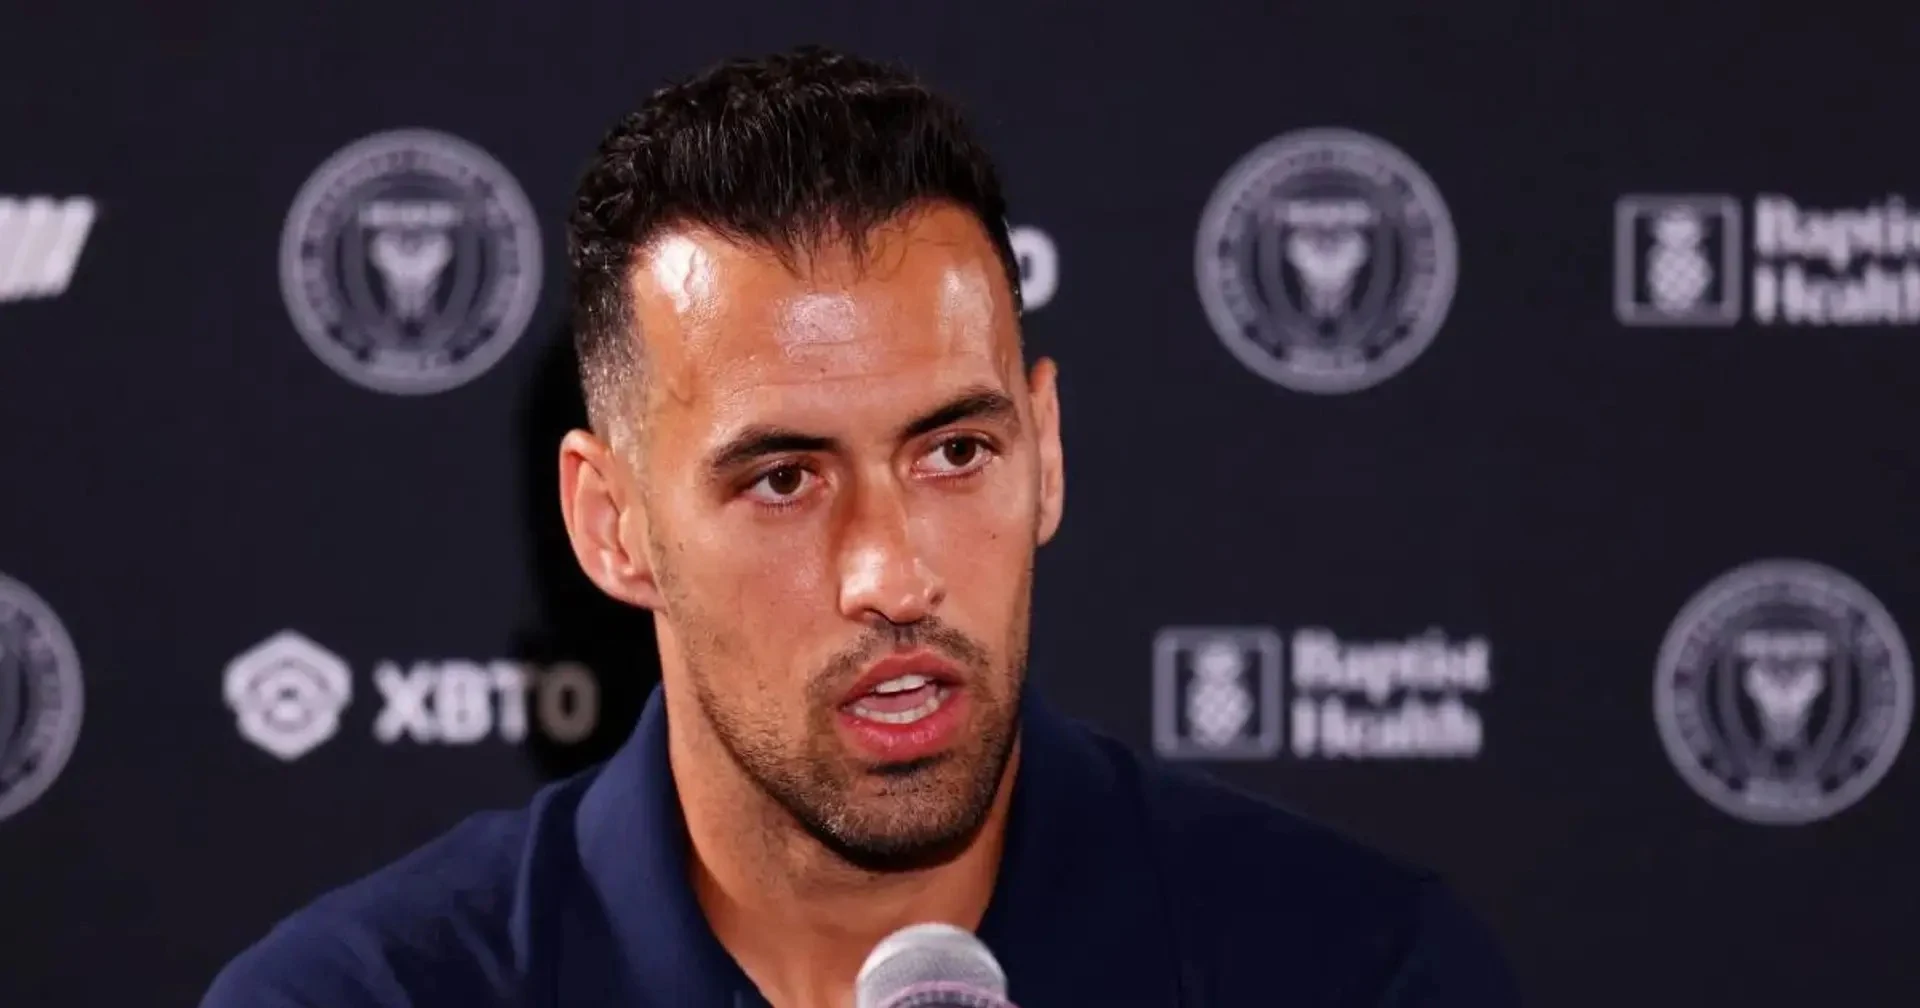 Barca to reportedly offer Busquets contract extension, but there's a catch